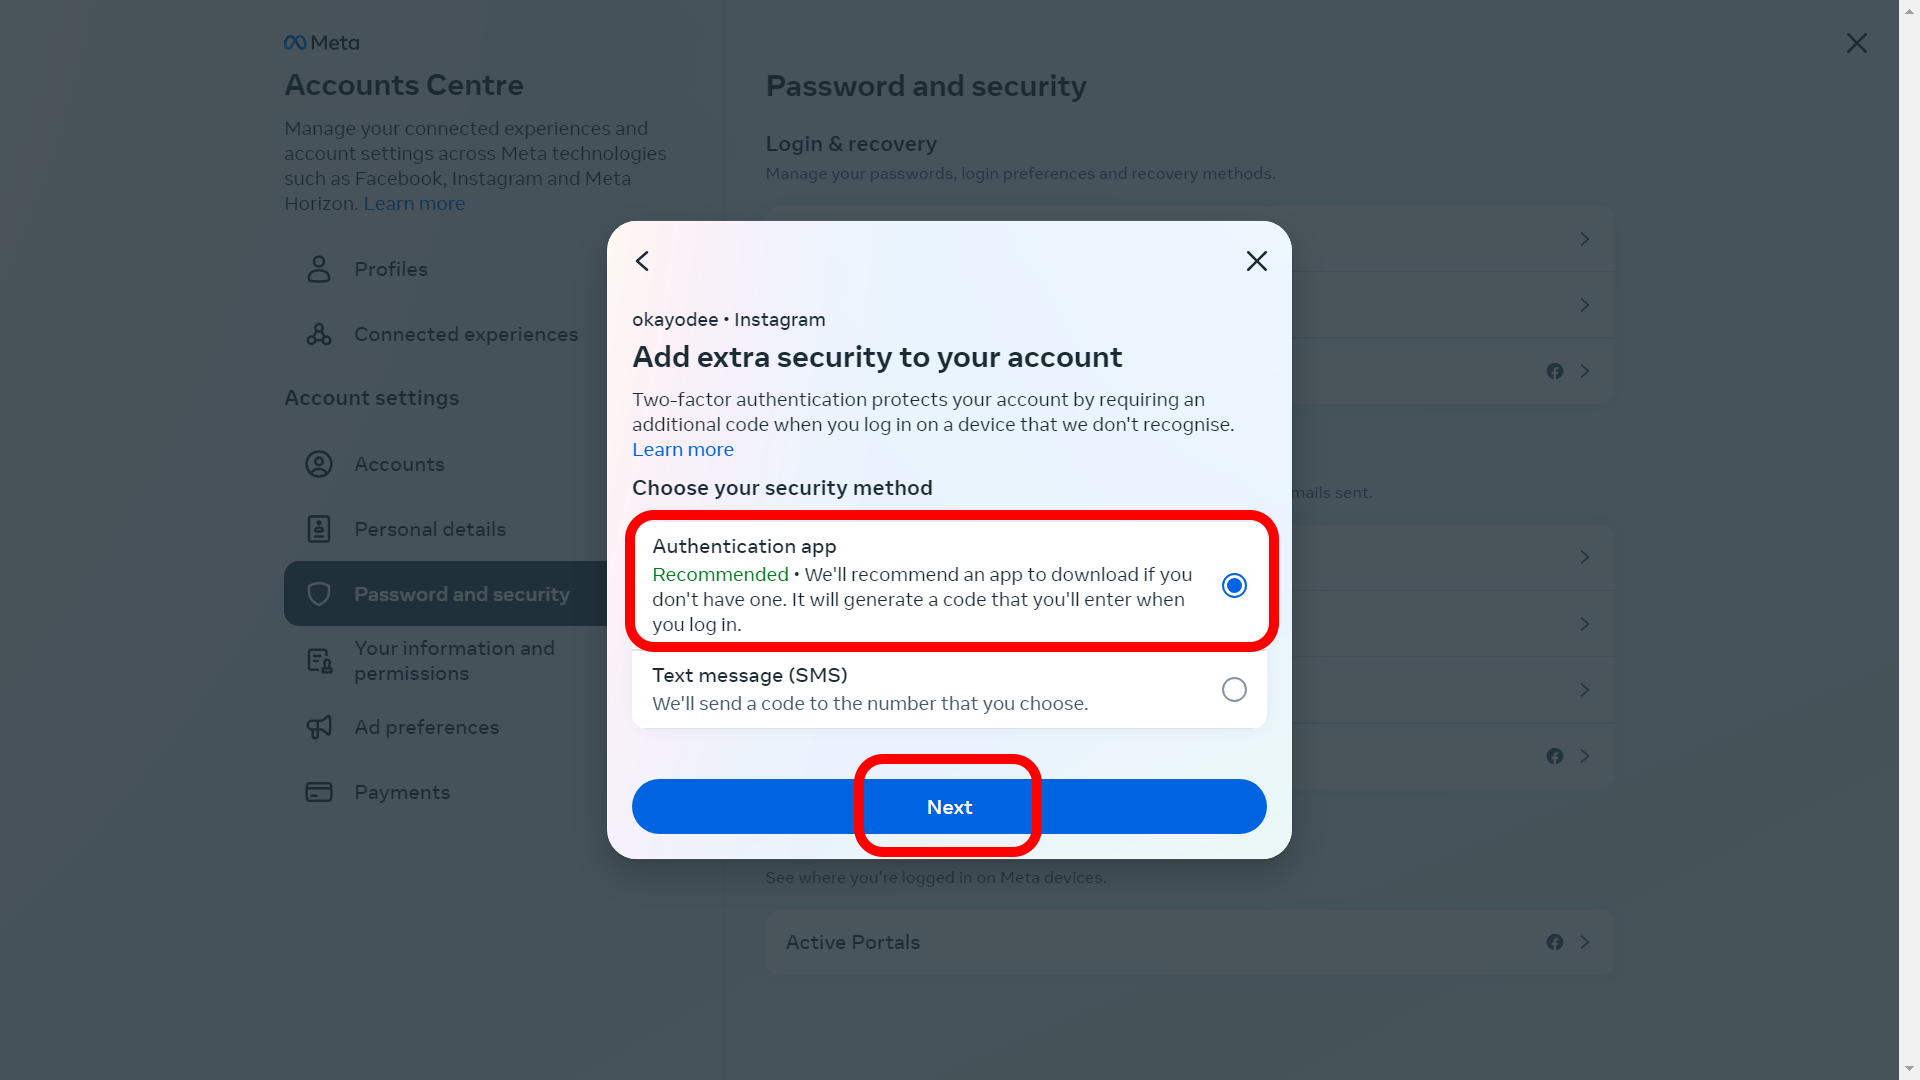 The Add extra security to your account dialog box highlighting the Next button